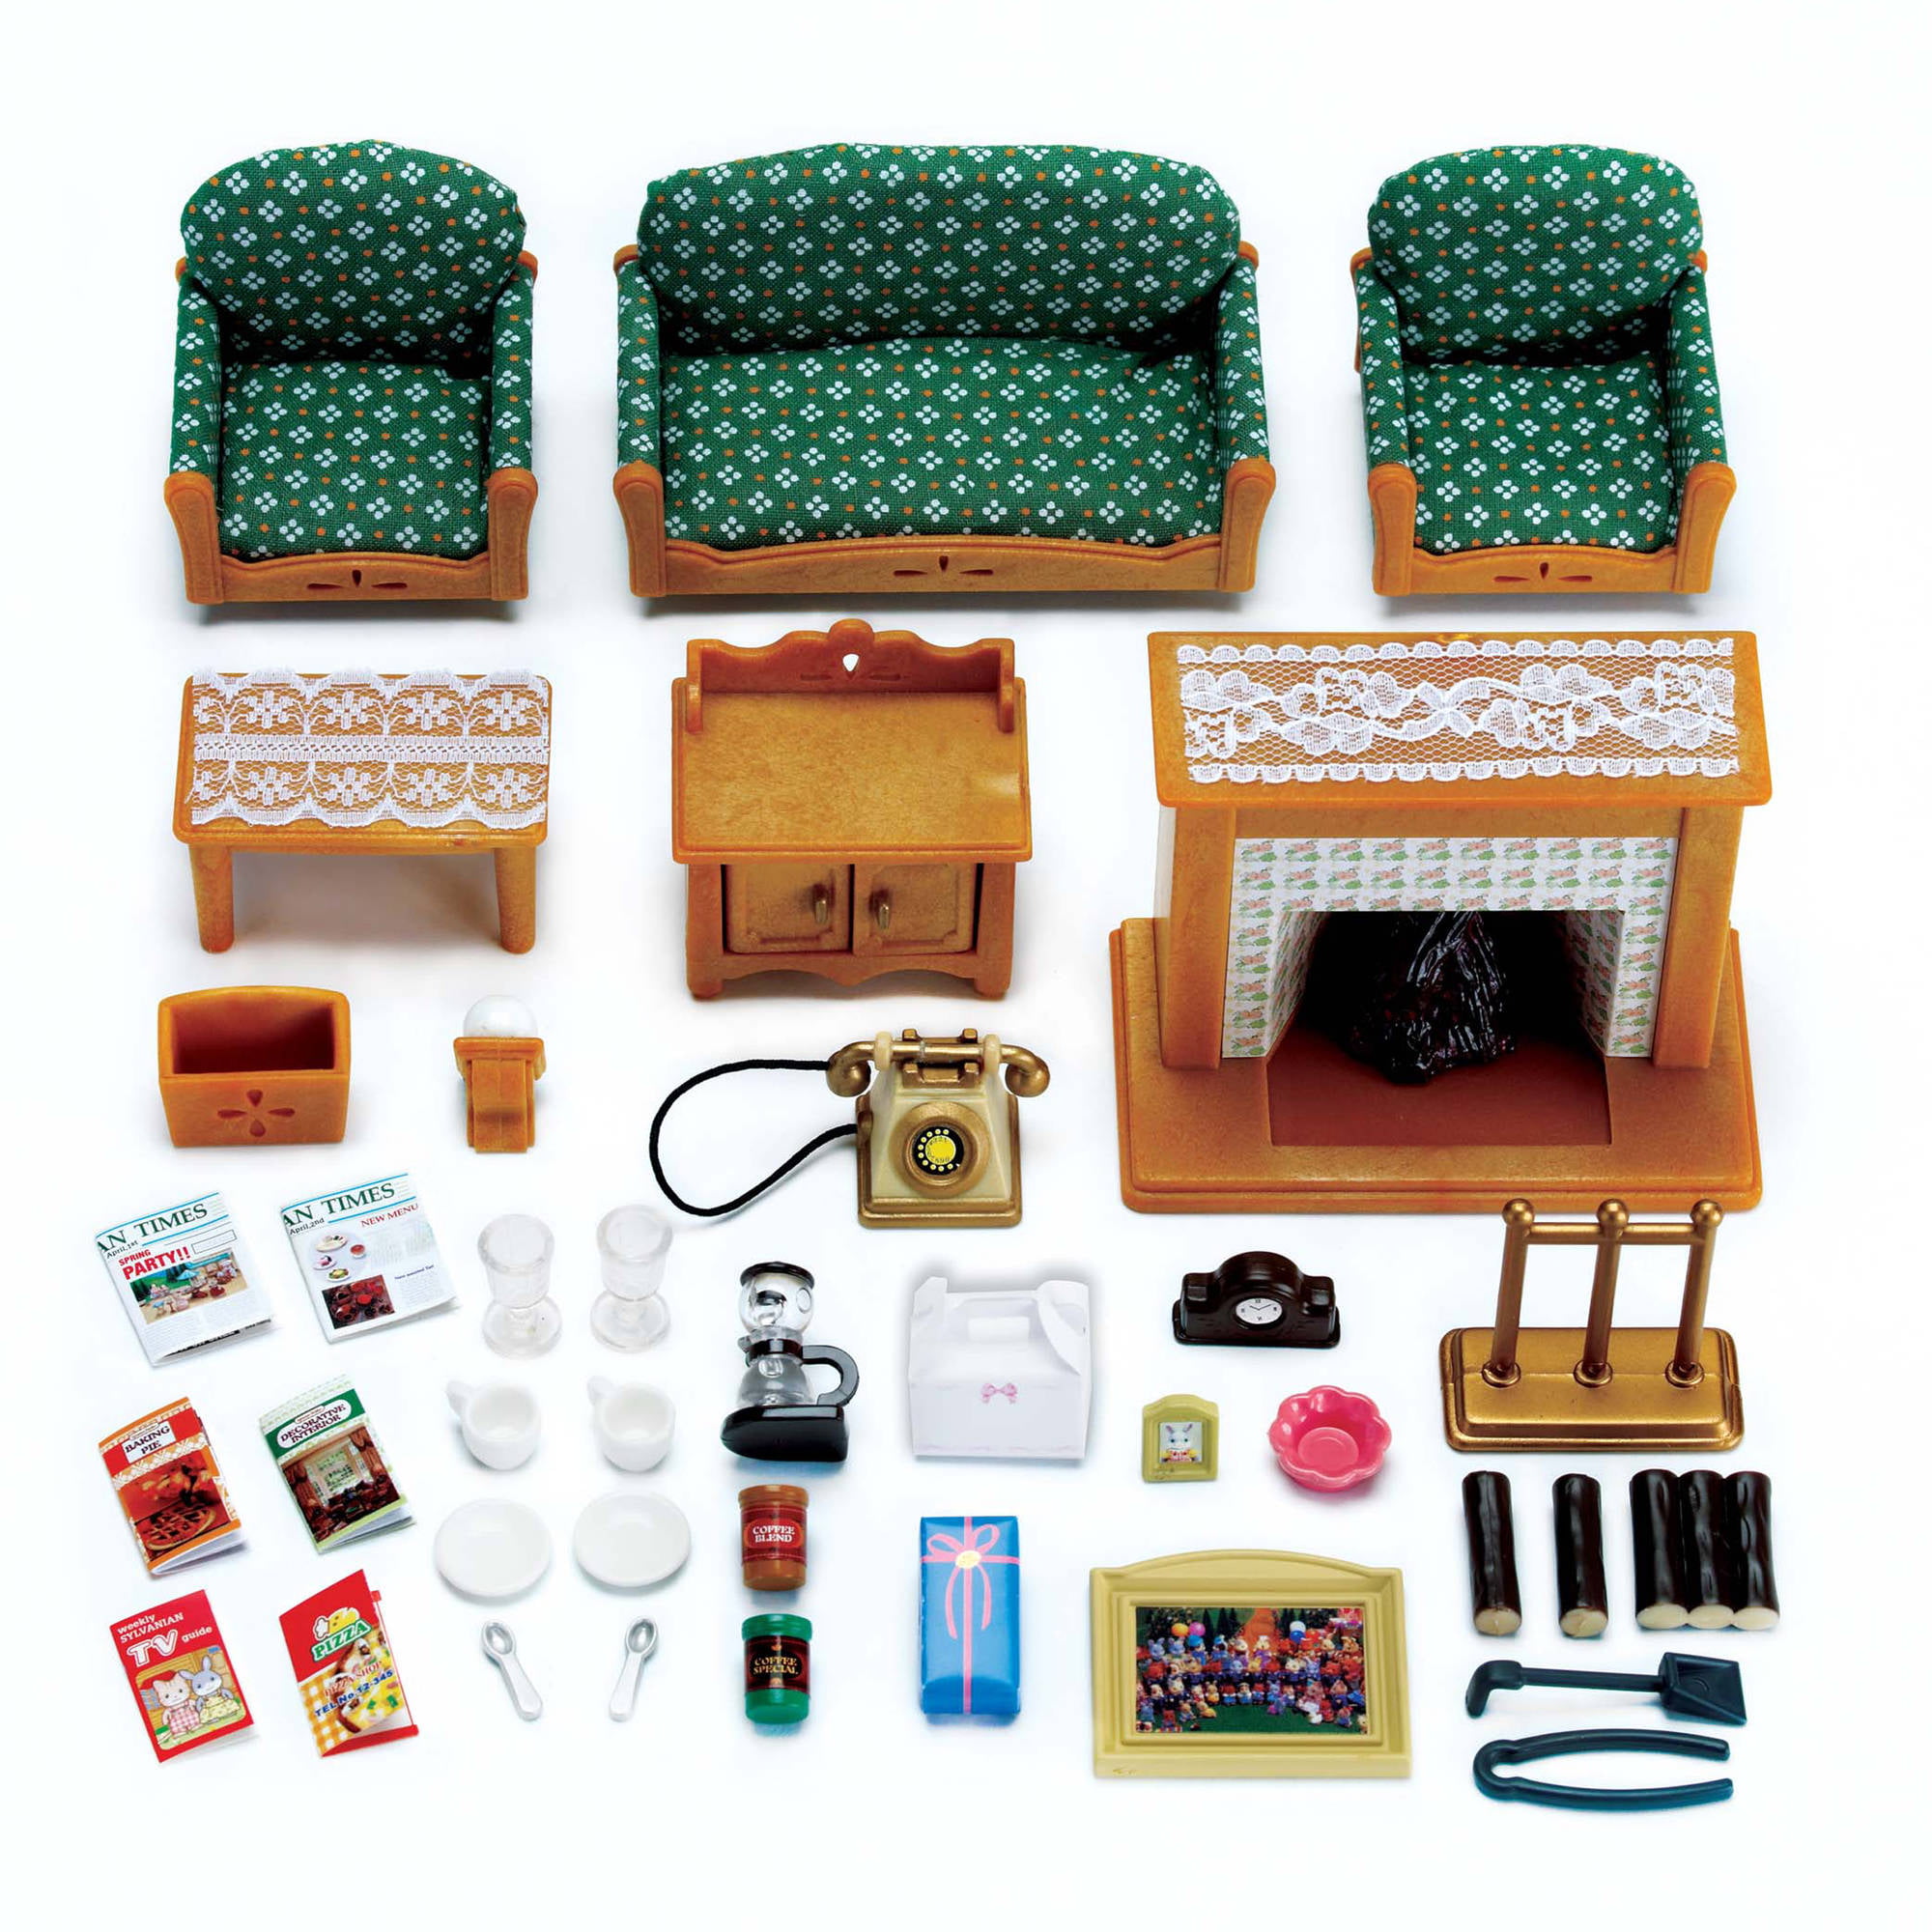 Calico Critters Deluxe Living Room Set – Modern House